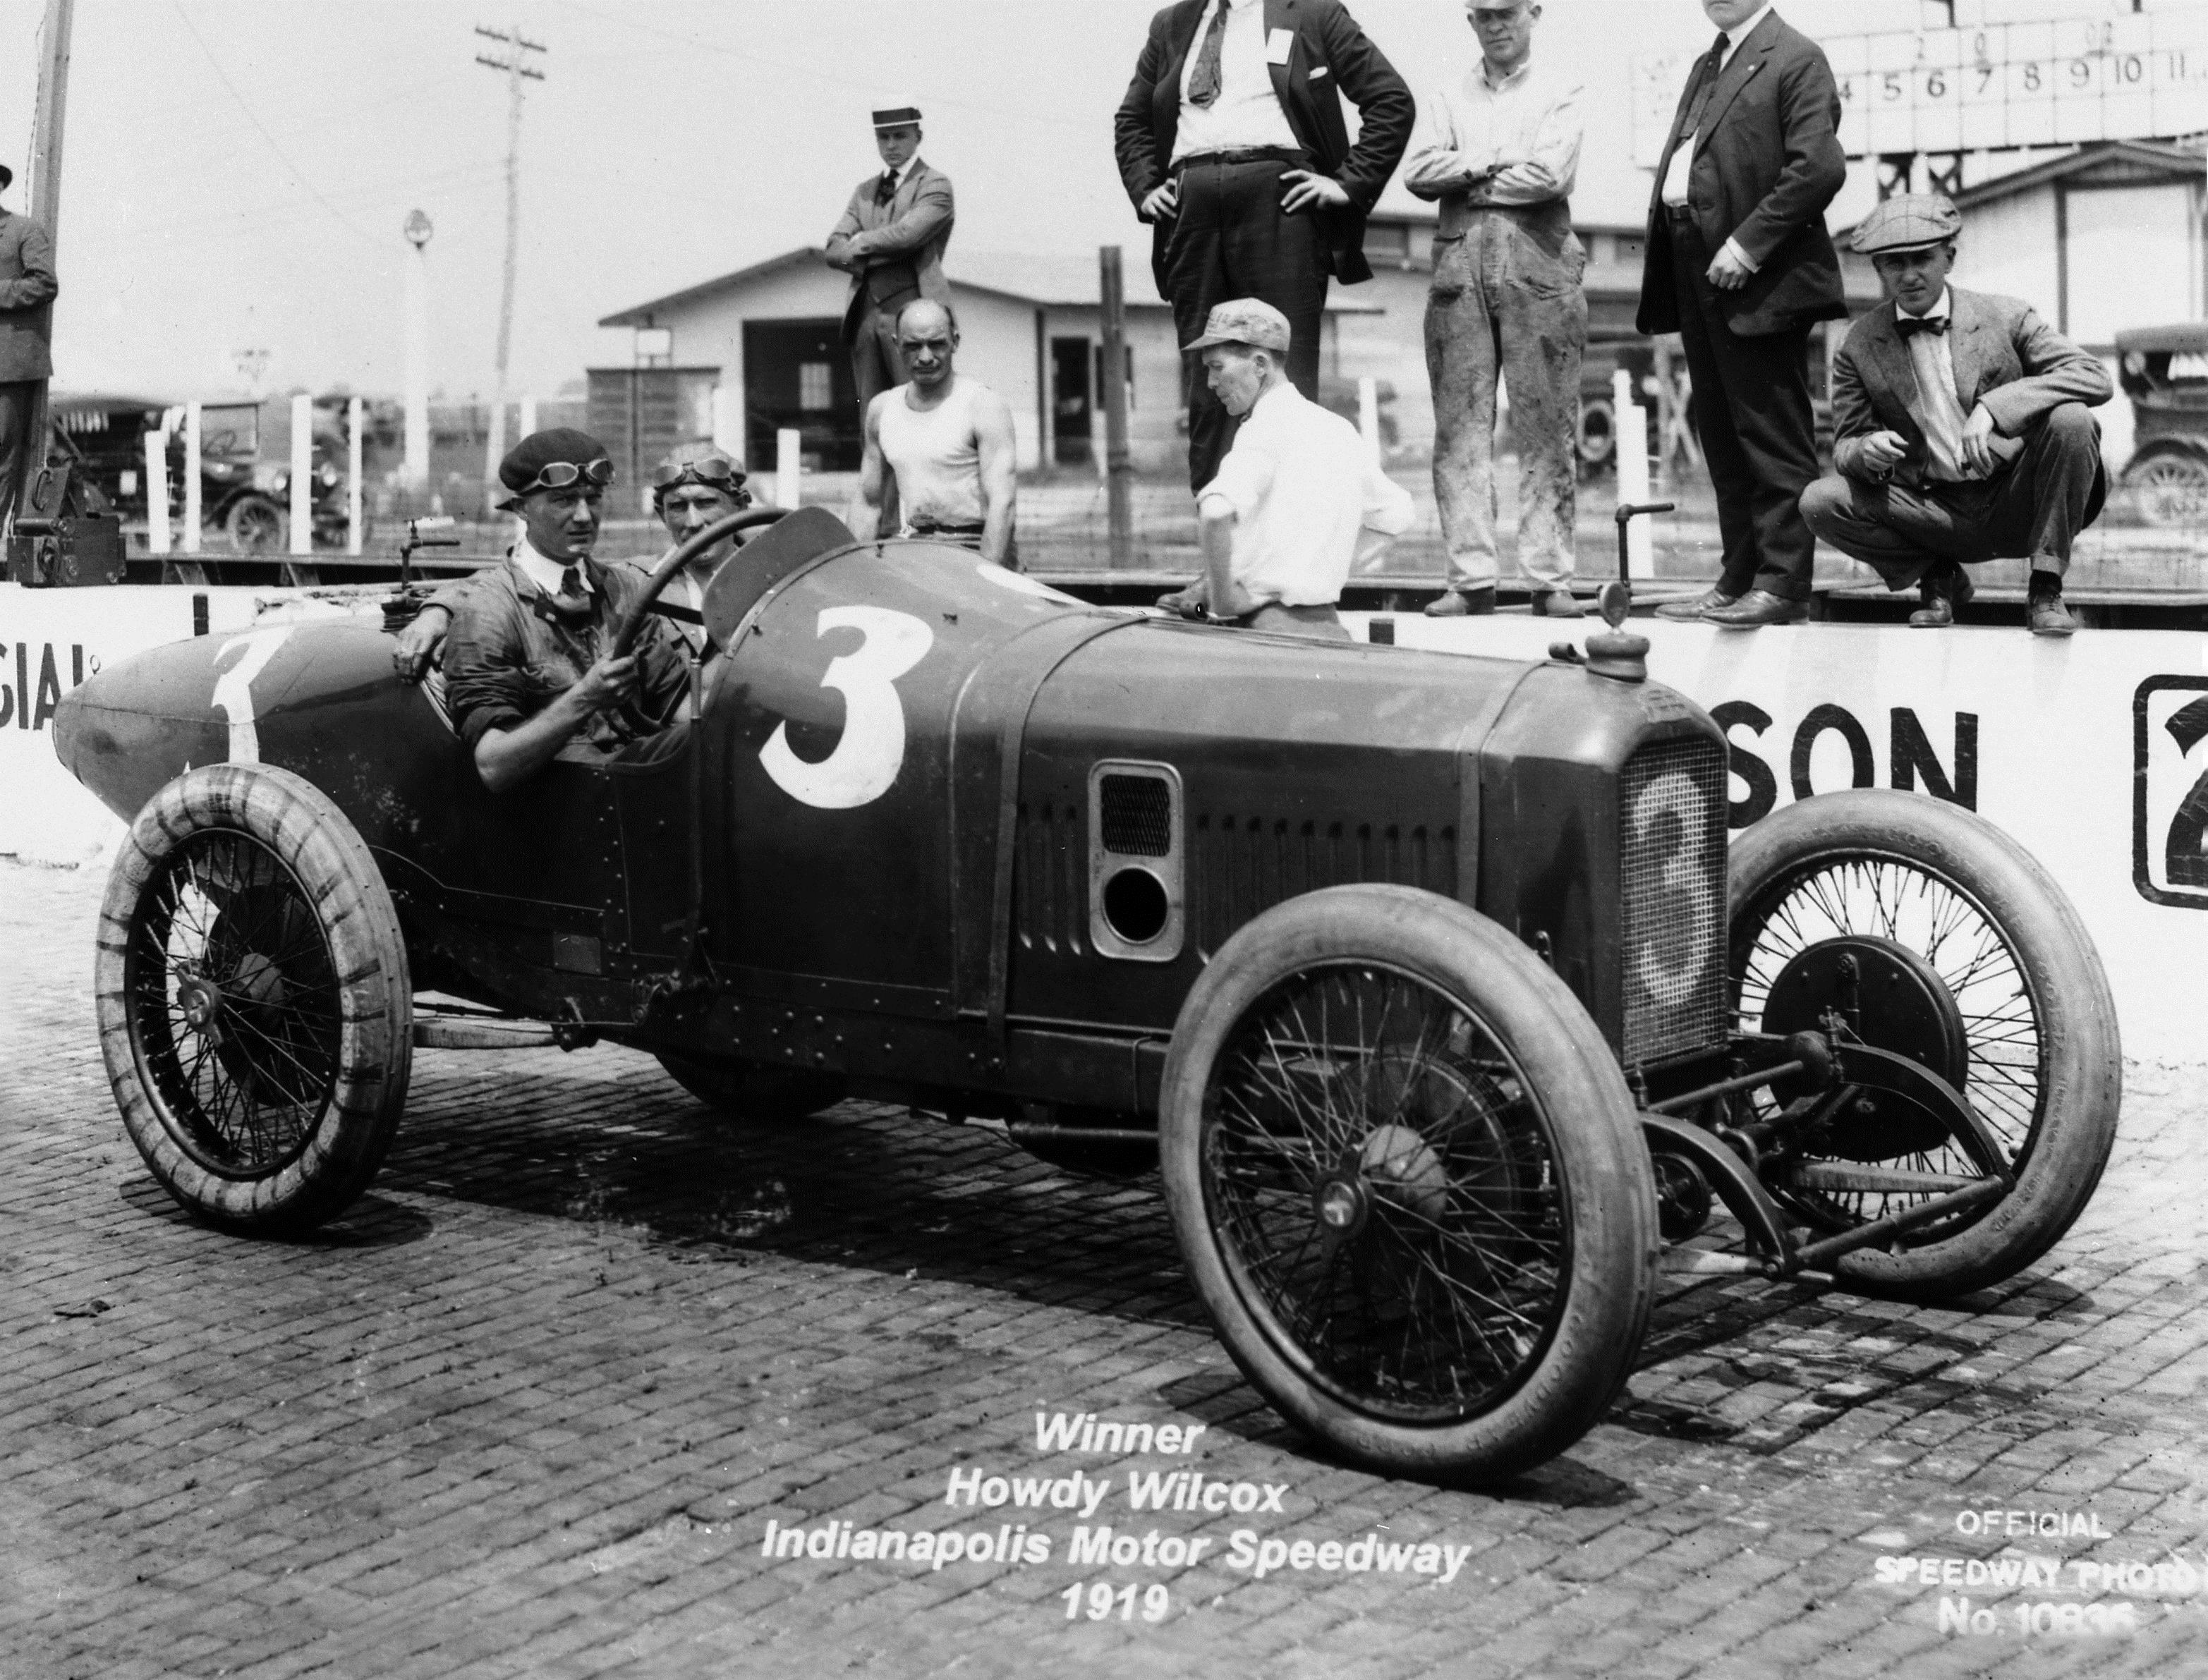 Indy 500 Winner Jimmy Murphy Photo 11X14 Indianapolis 1922 Race Motor Speedway 